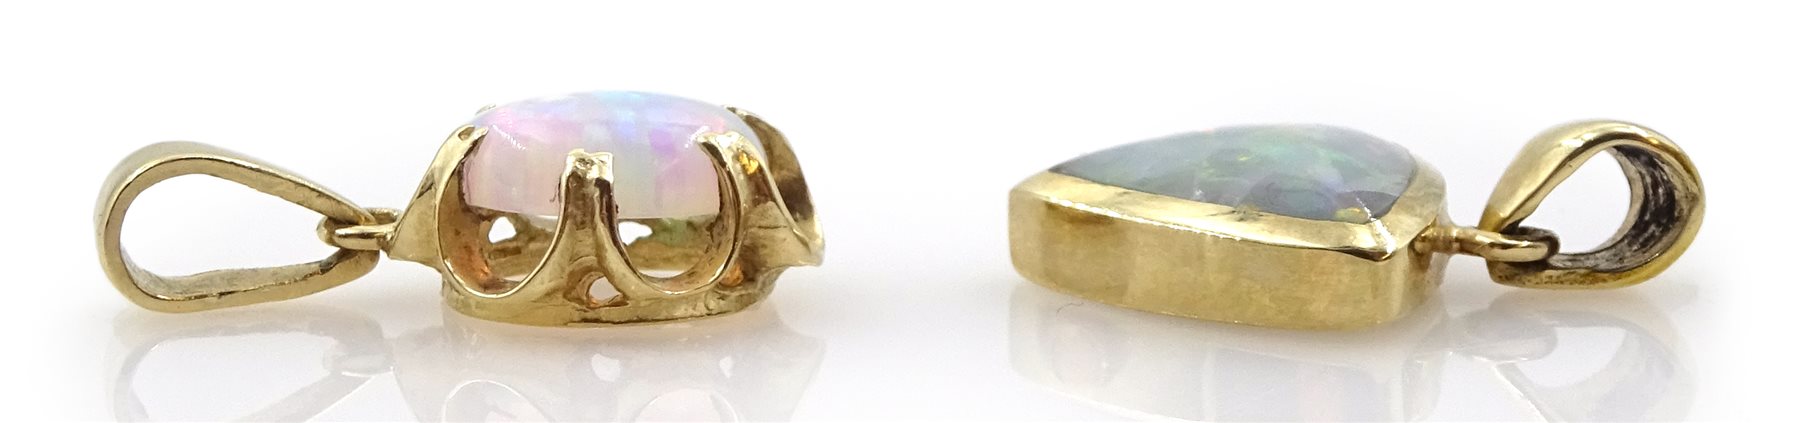 Two gold opal pendants, both hallmarked 9ct - Image 2 of 3